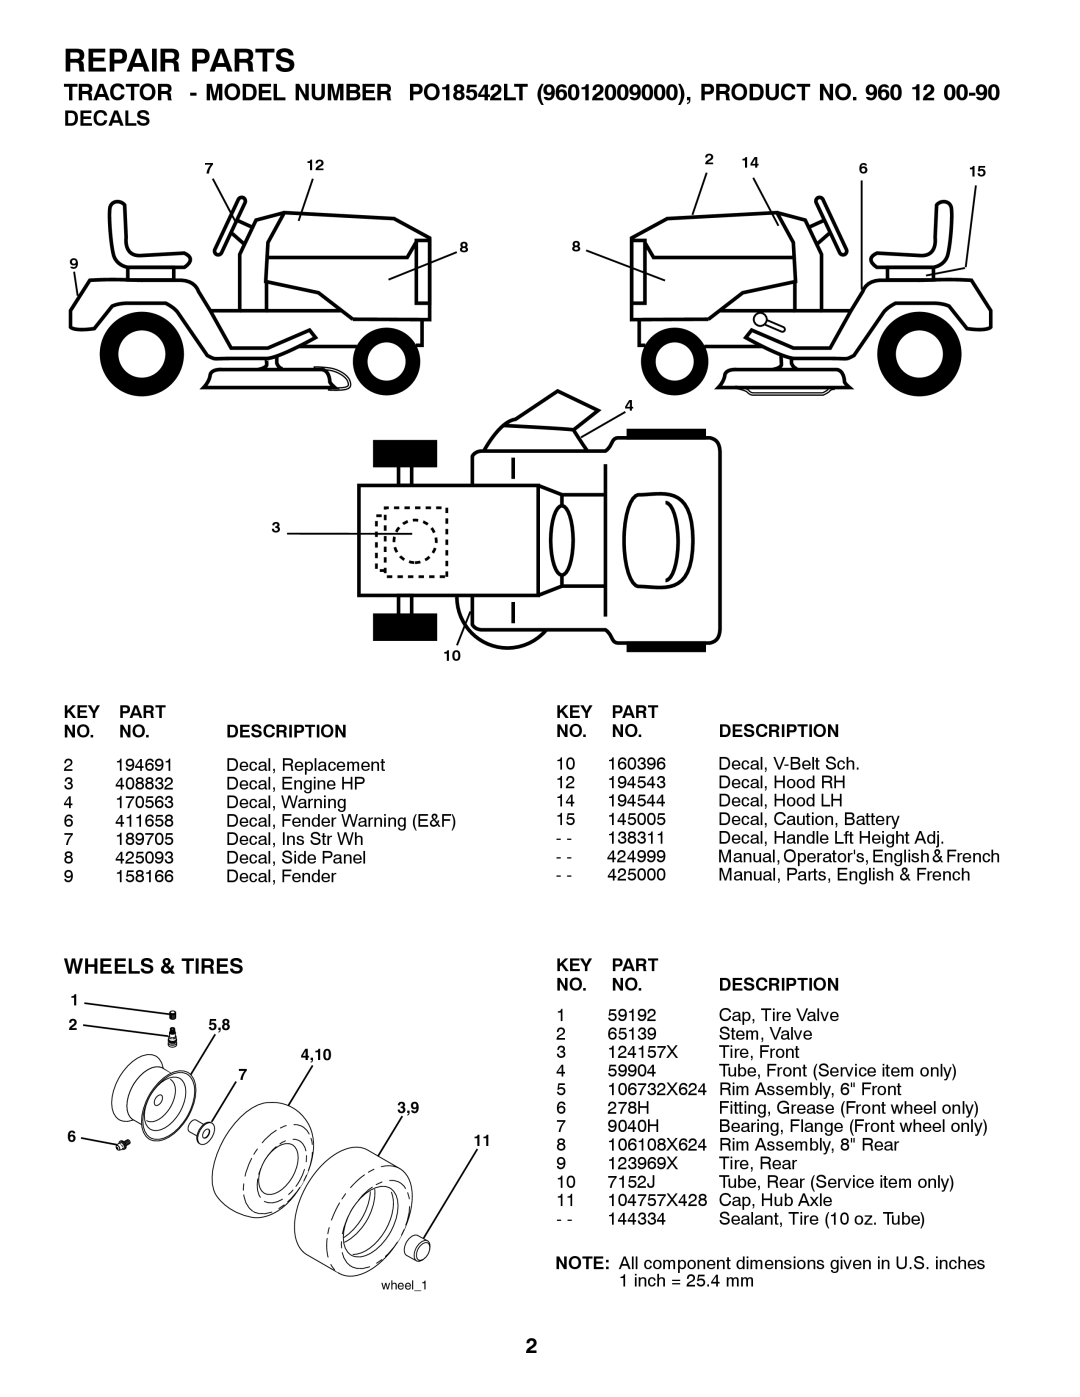 Poulan 960 12 00-90 Repair Parts, TRACTOR - MODEL NUMBER PO18542LT 96012009000, PRODUCT NO. 960, Decals, Wheels & Tires 